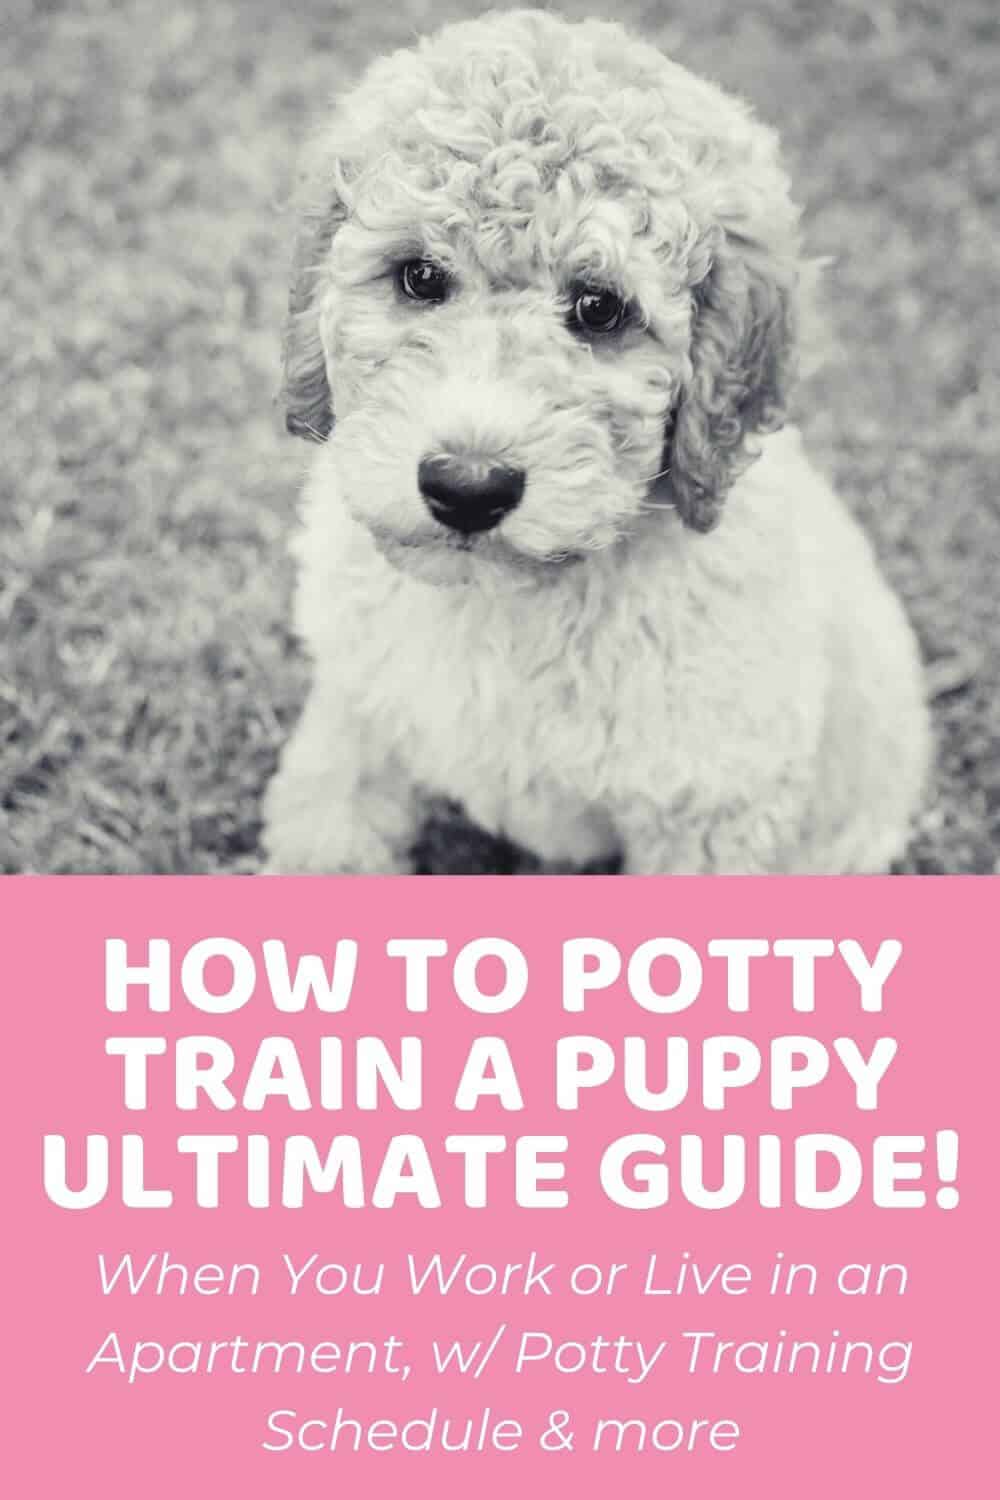 How to Potty Train a Puppy_ Ultimate Guide With Puppy Potty Training Schedule